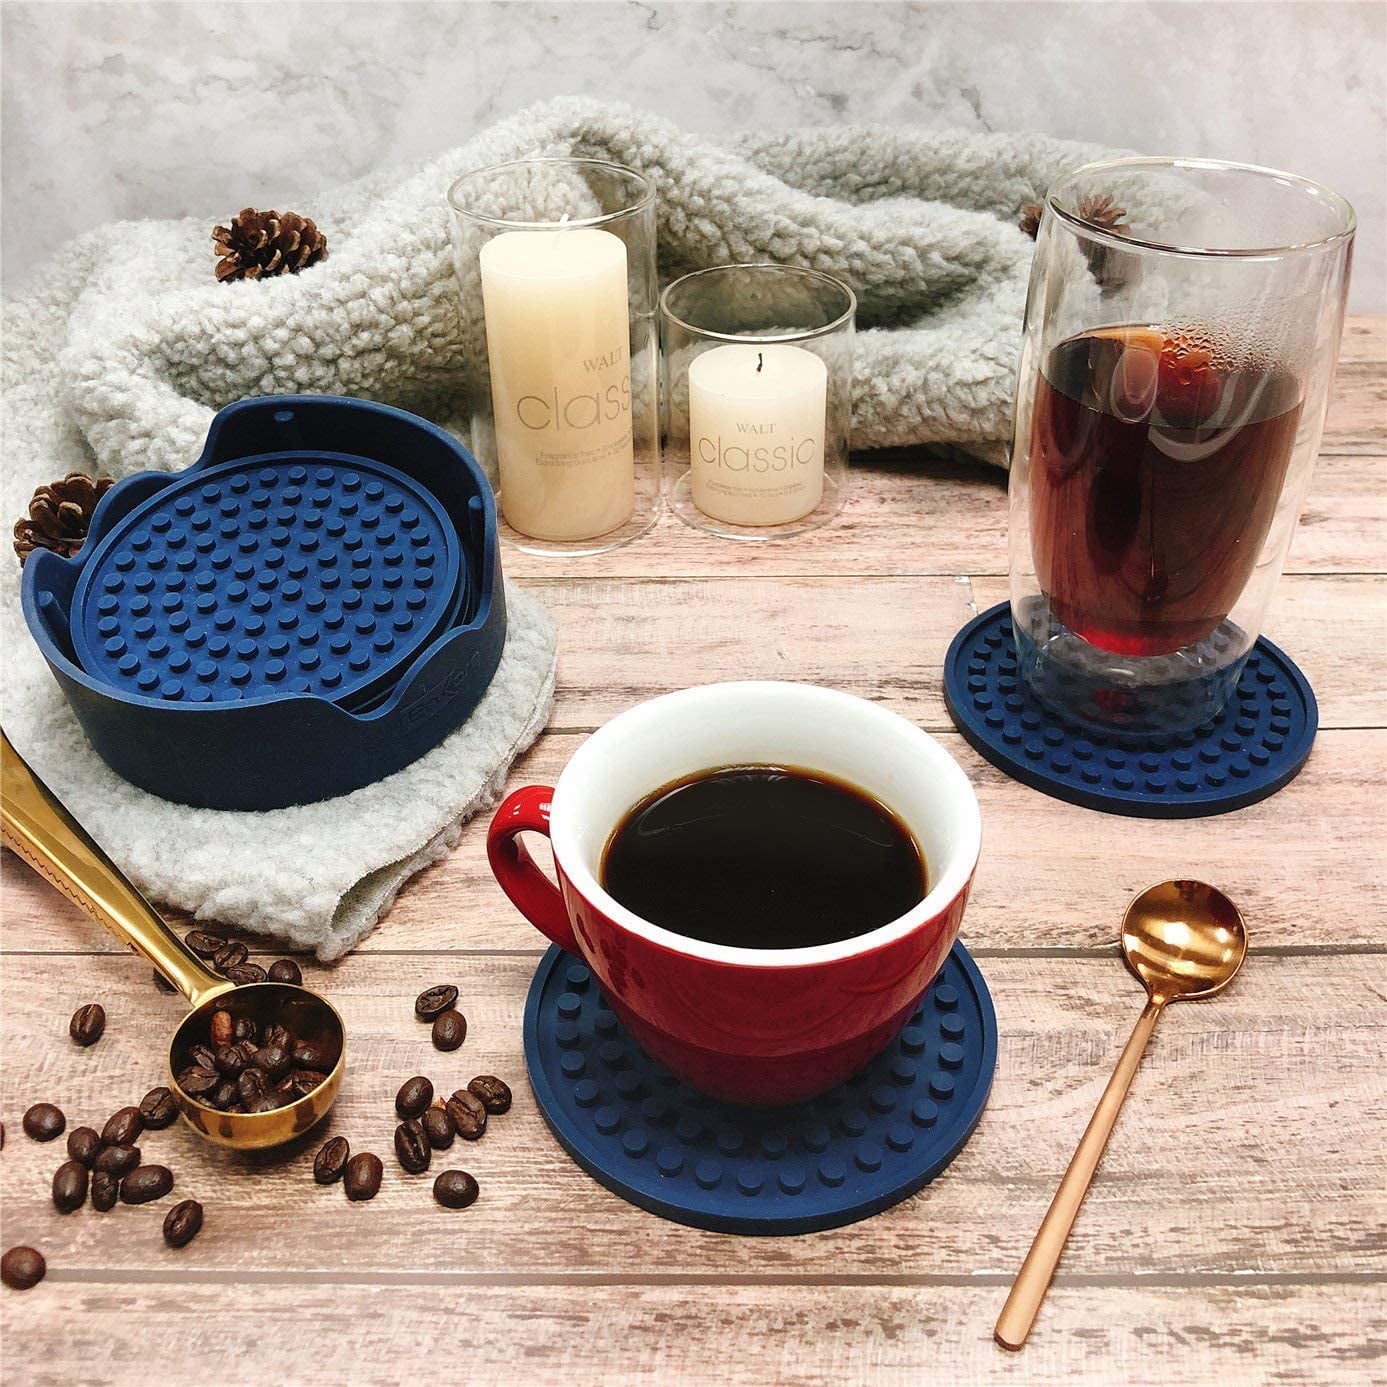 6 Pack Navy Coasters in Holder Plus 6 Absorbent Sugar Skull Cup Mats with Cork Backing Blue Coaster Set & Ceramic Coasters Bundle